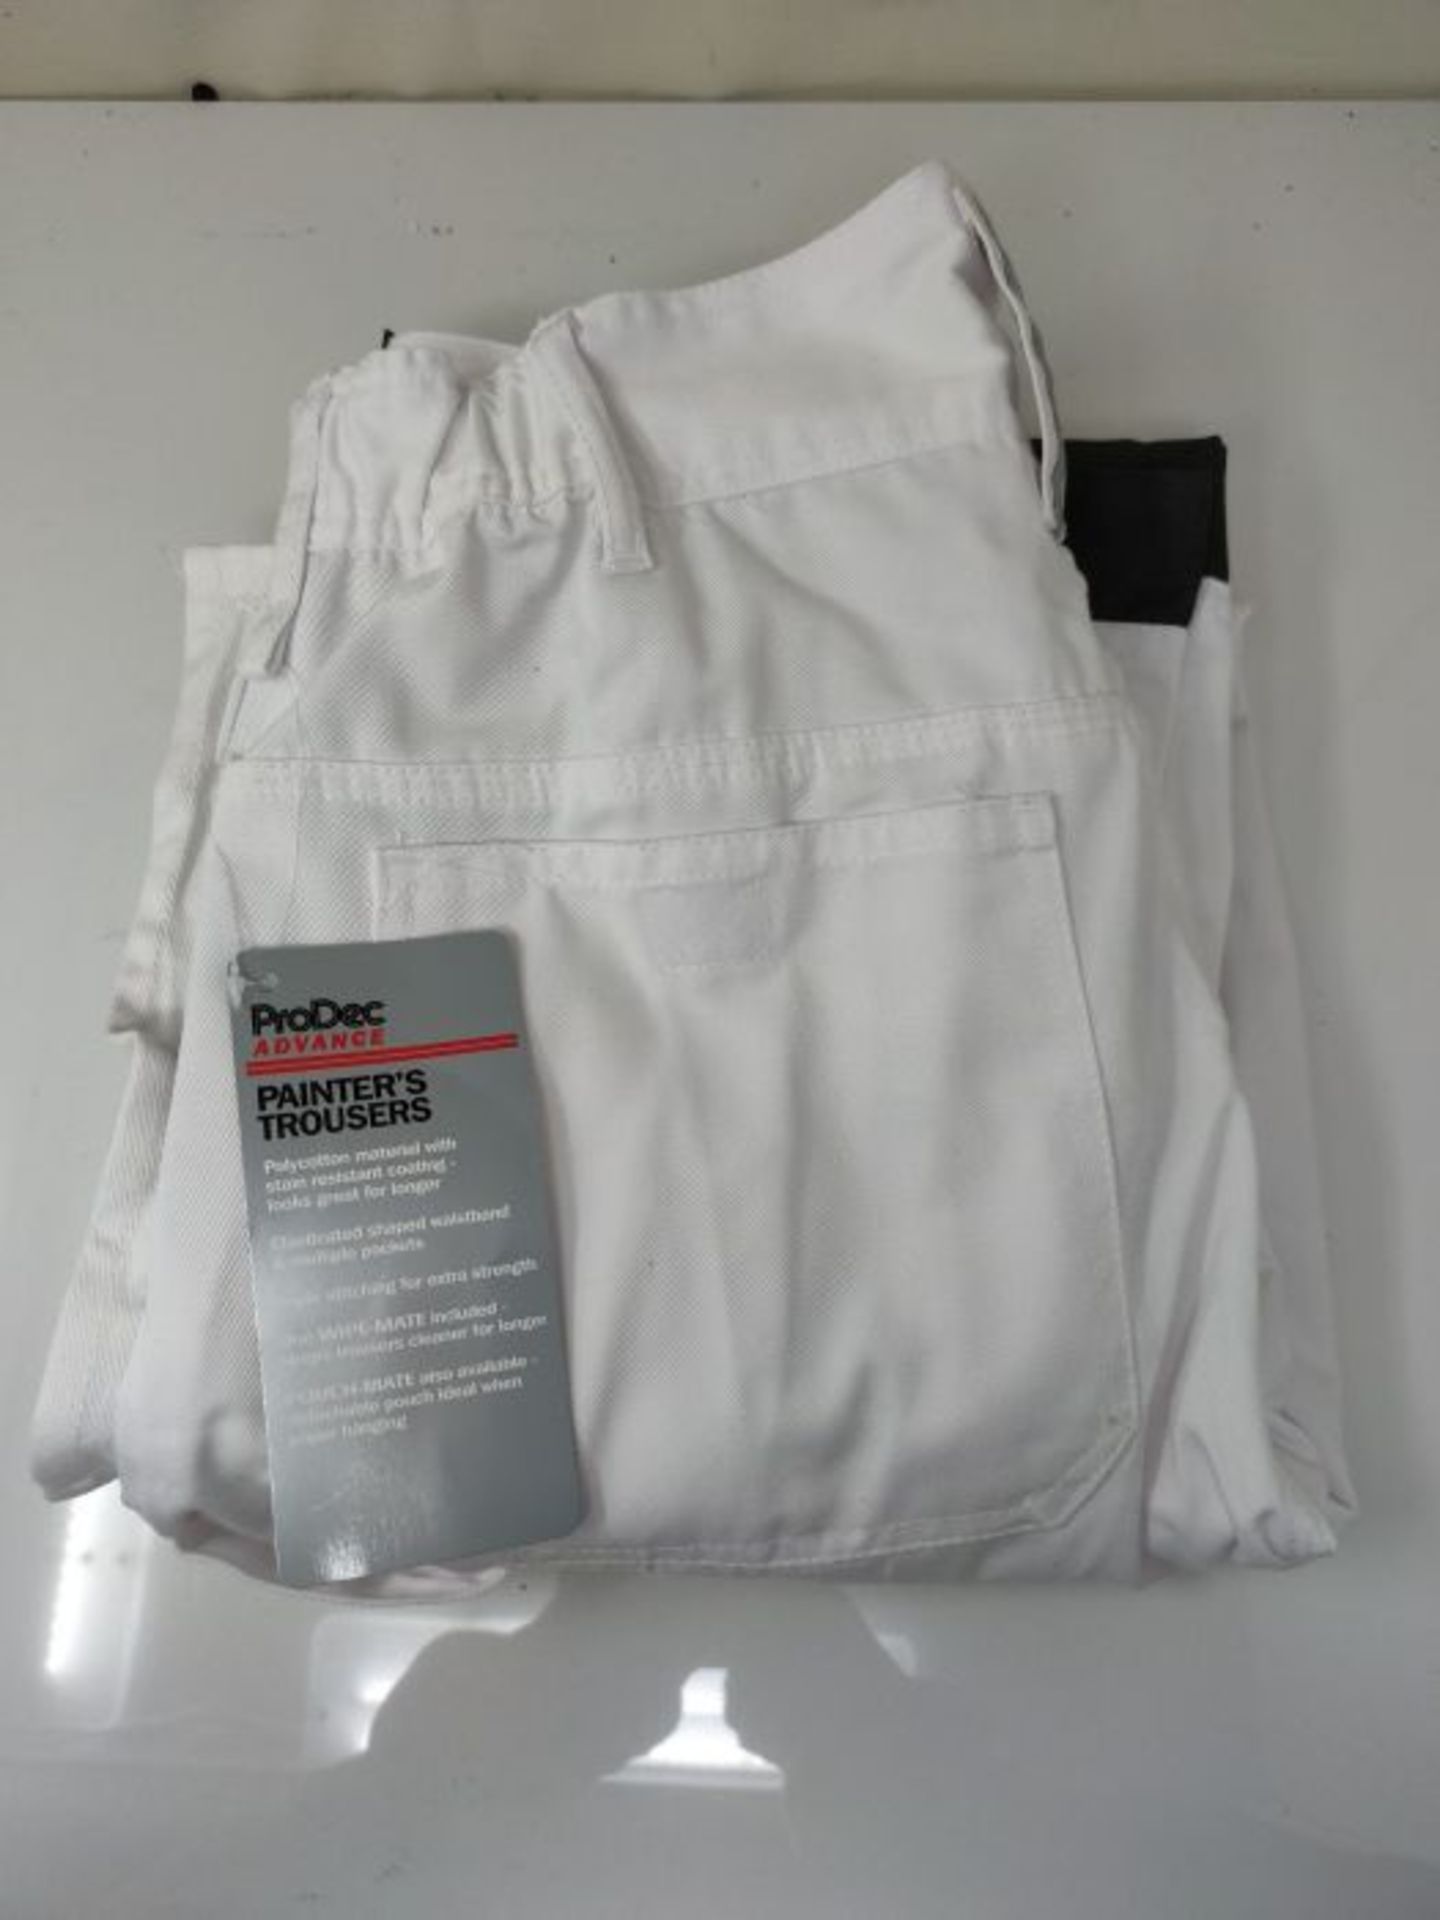 ProDec Advance Stain-Resistant, Hardwearing, Multi-Pocket Decorator's Trousers - Image 2 of 3